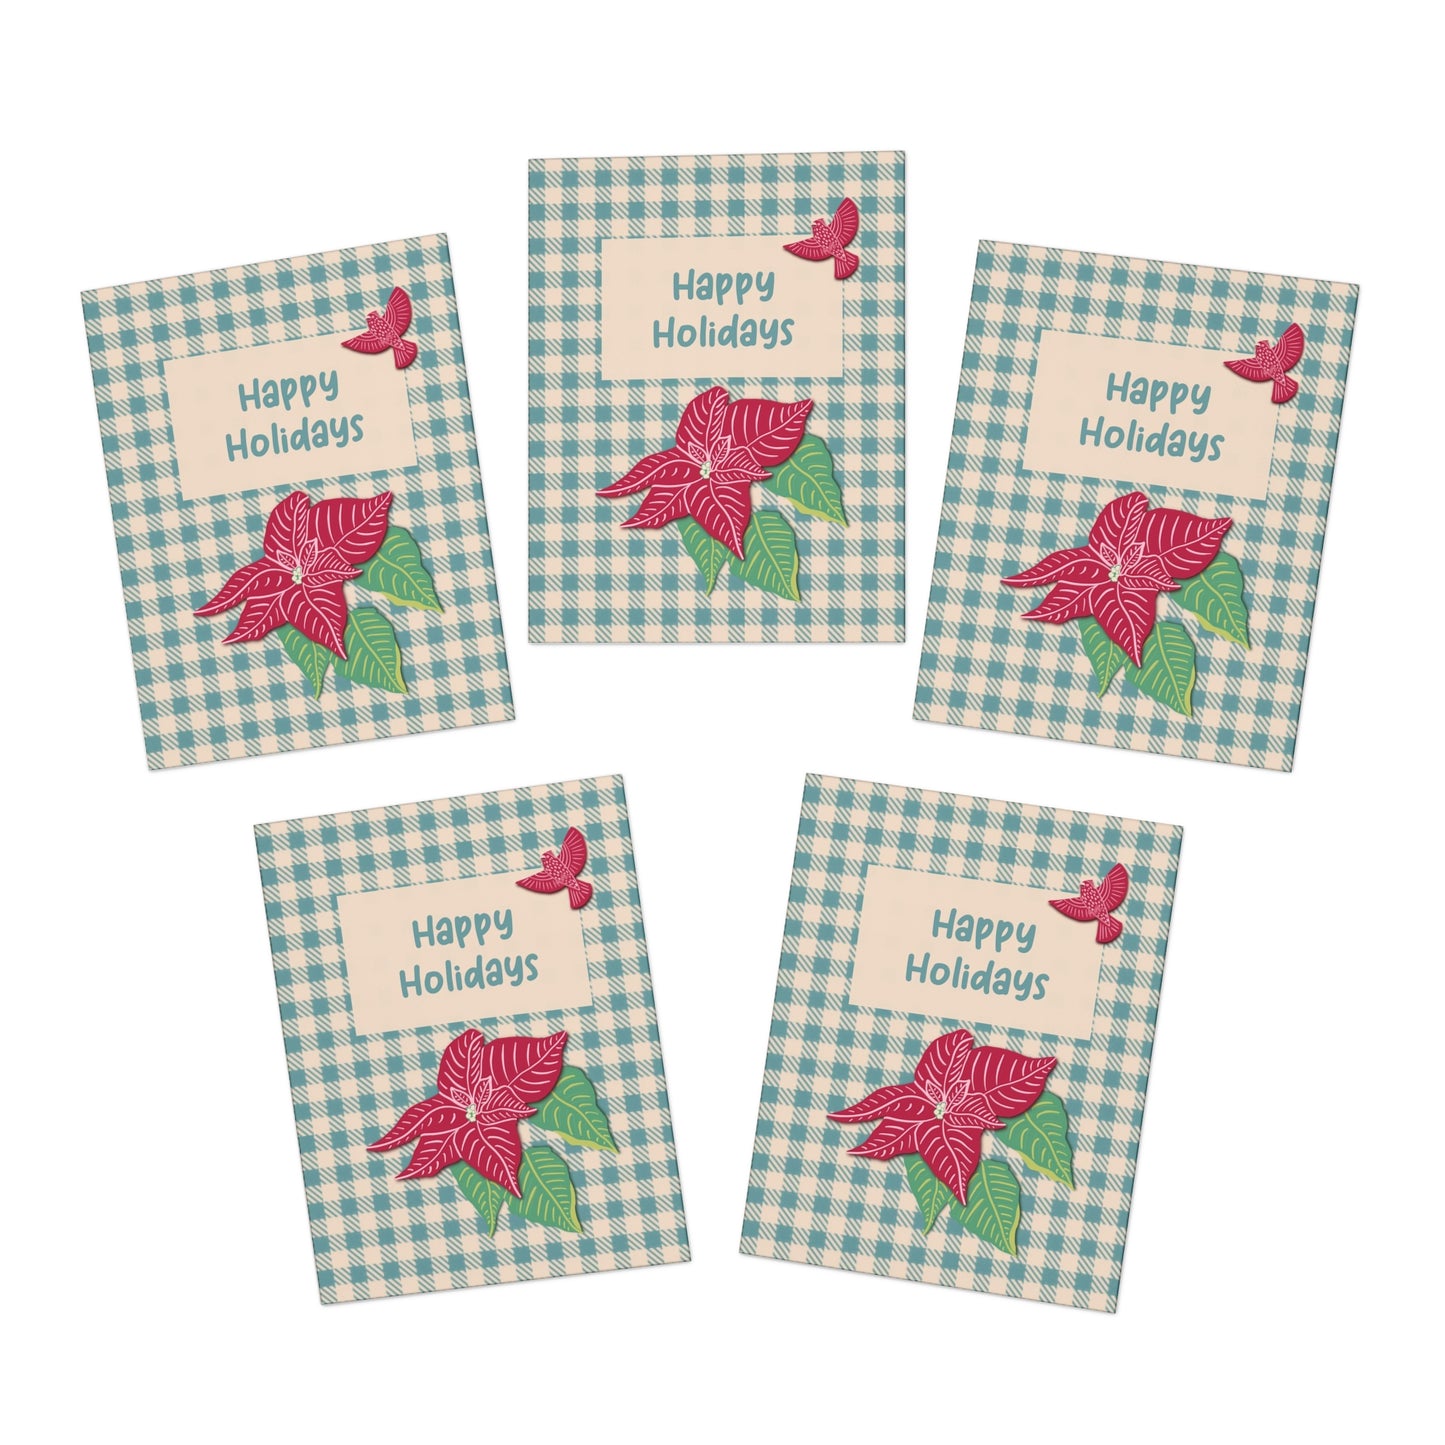 Pink Poinsettia & Cardinal on Teal Plaid Holiday Greeting Cards (5-Pack) - FREE SHIPPING